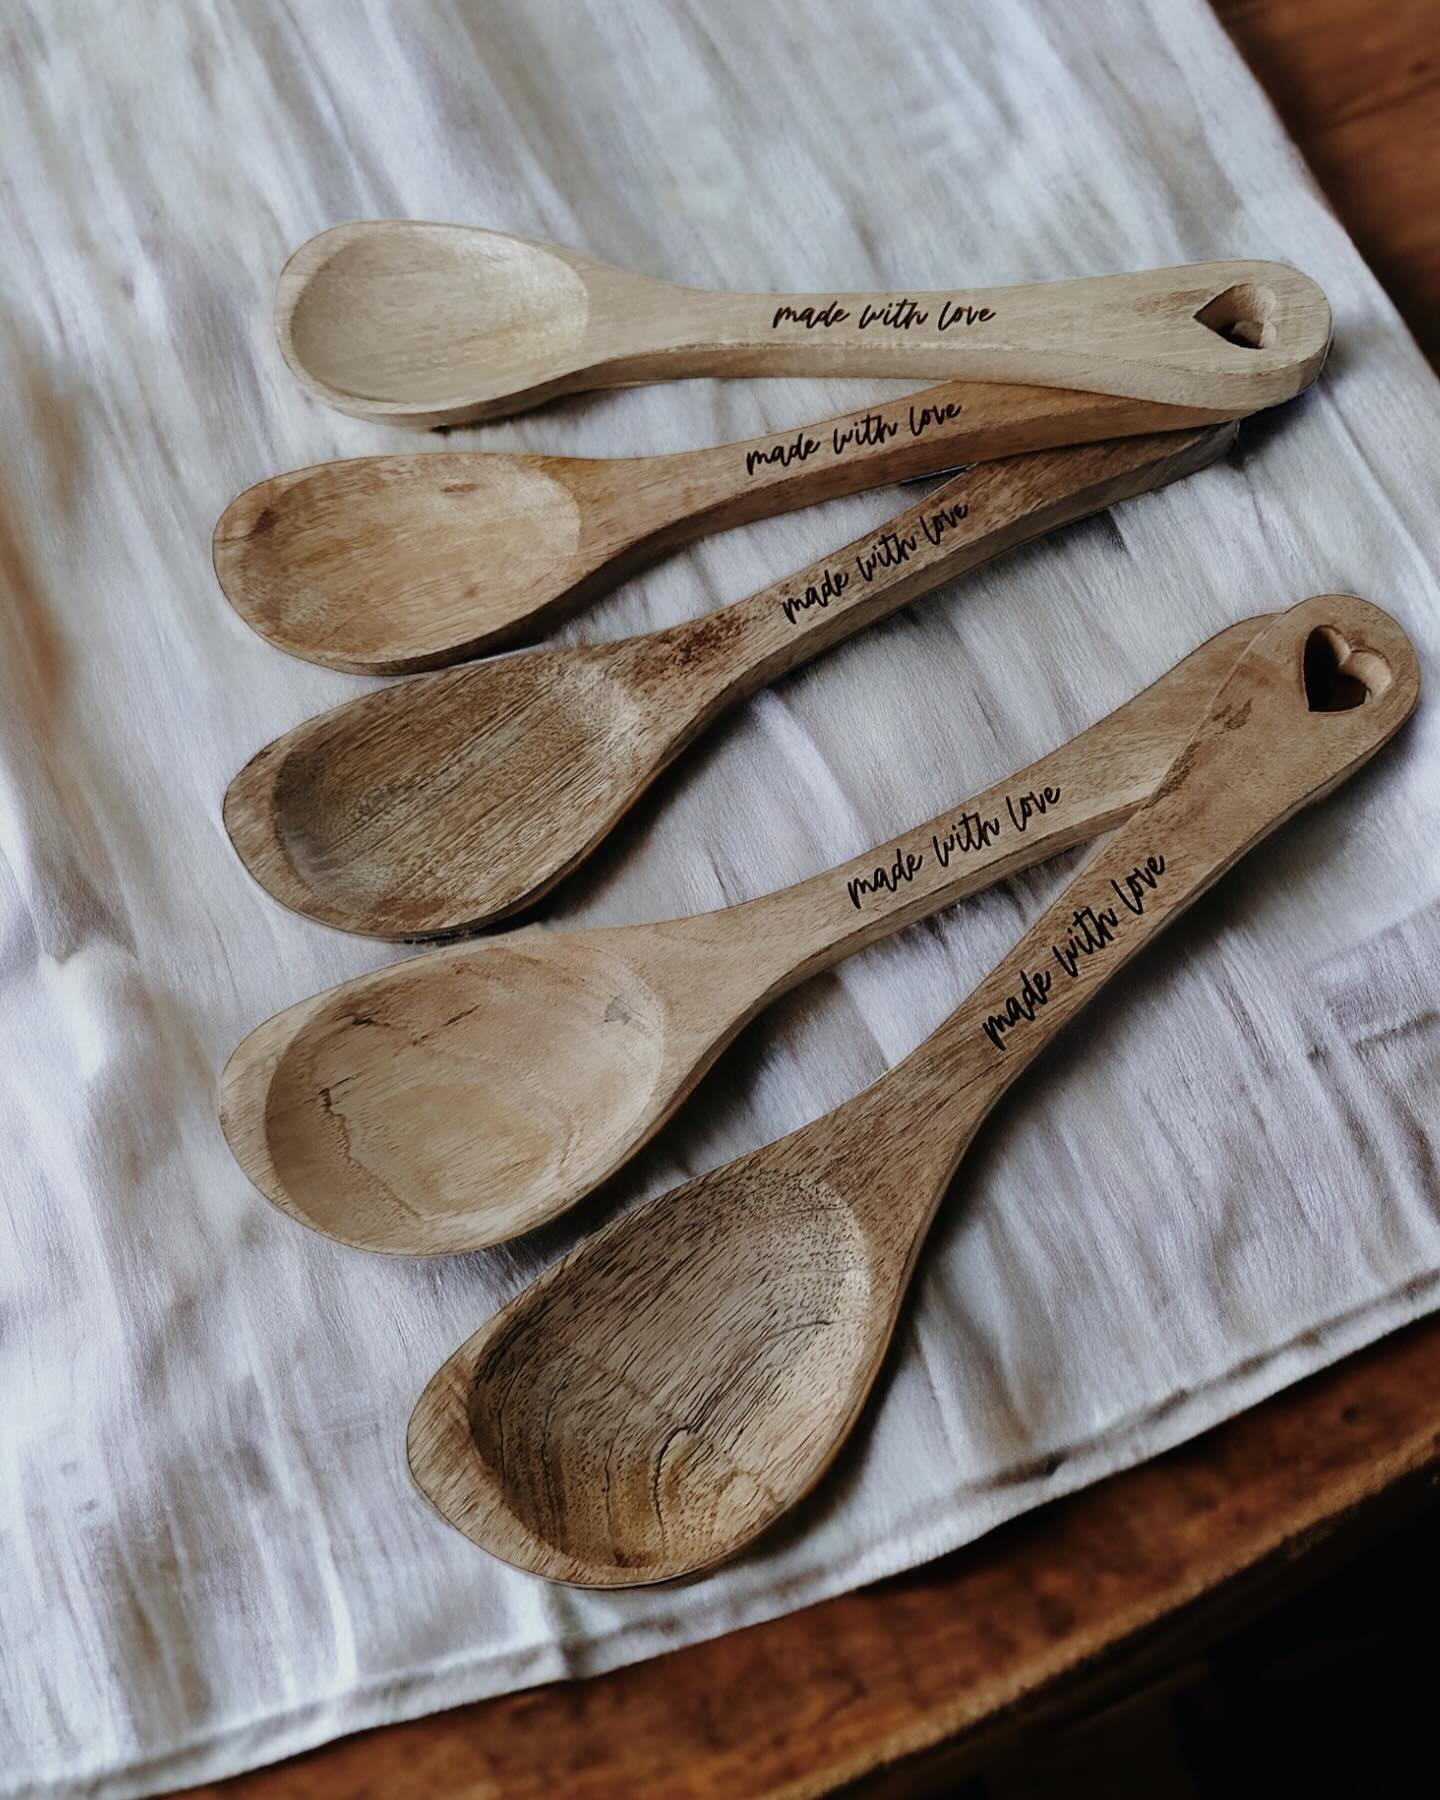 Made With Love Spoon